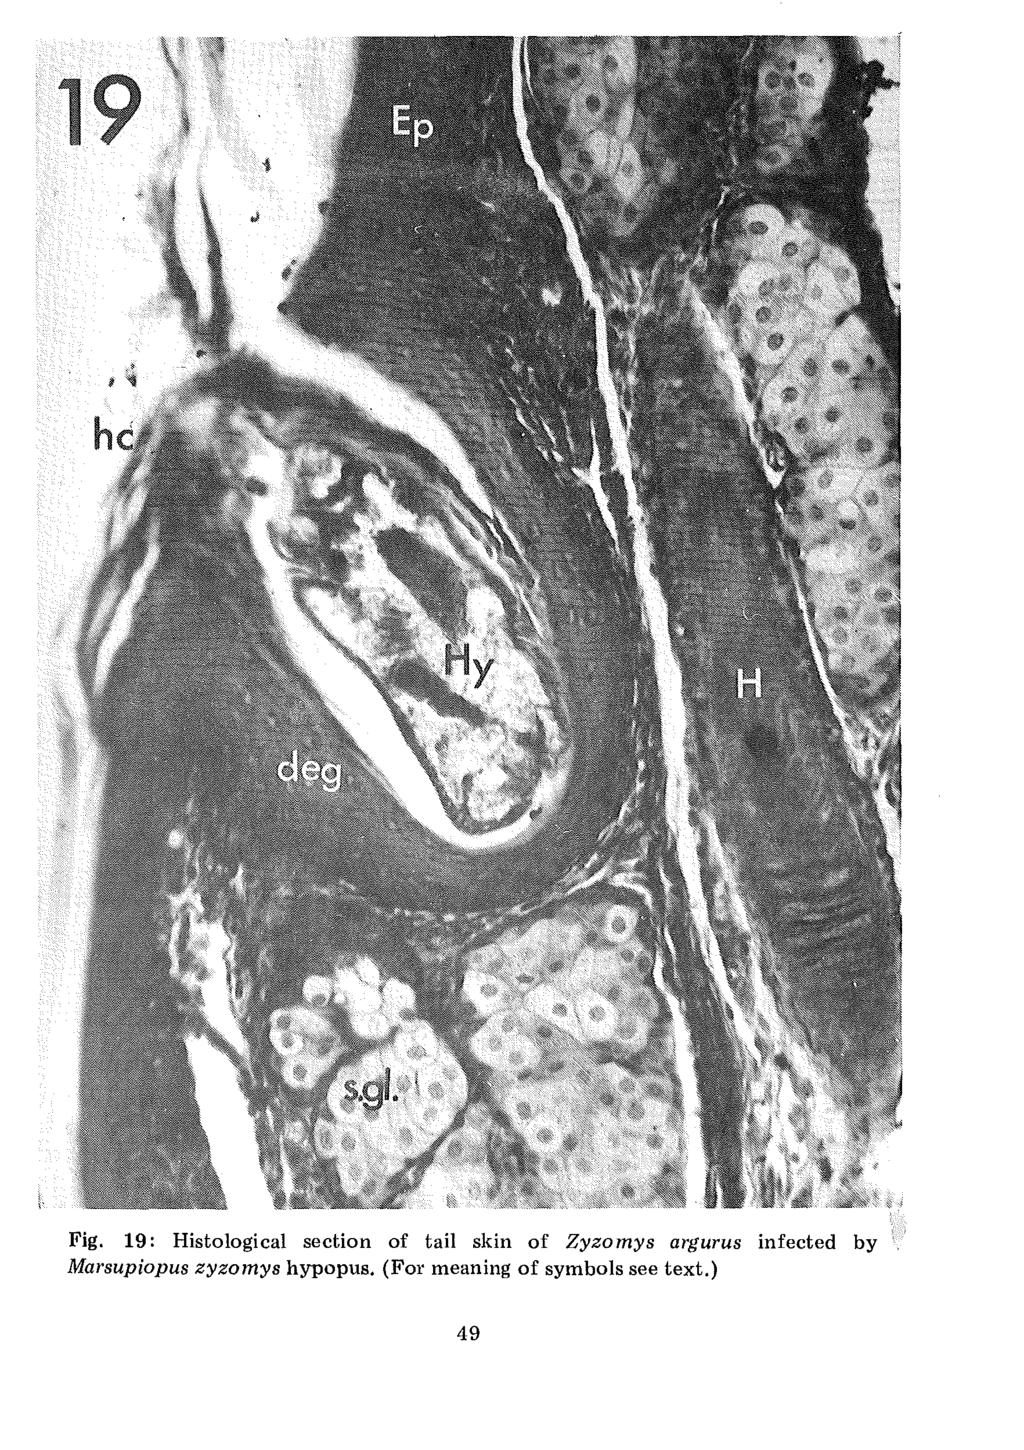 Fig. 19: Histological section of tail skin of Zyzomys argurus